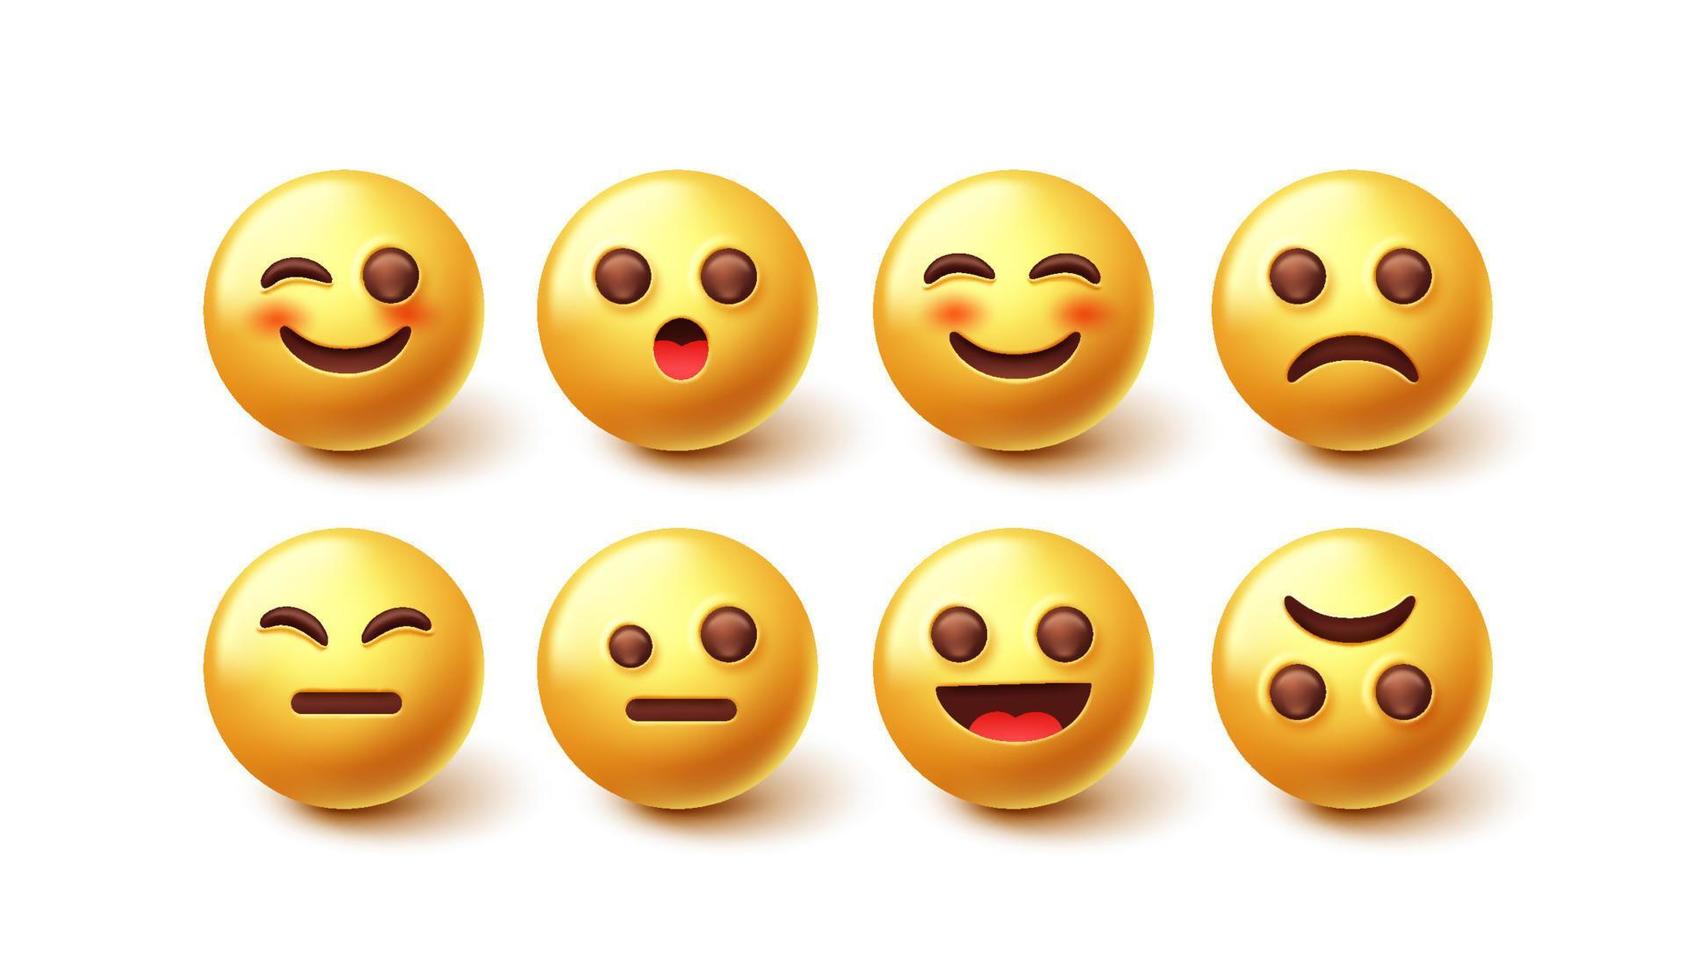 Emoji characters vector set. Emoticon 3d character design in happy and sad face collection isolated in white background for emojis graphic expression. Vector illustration.